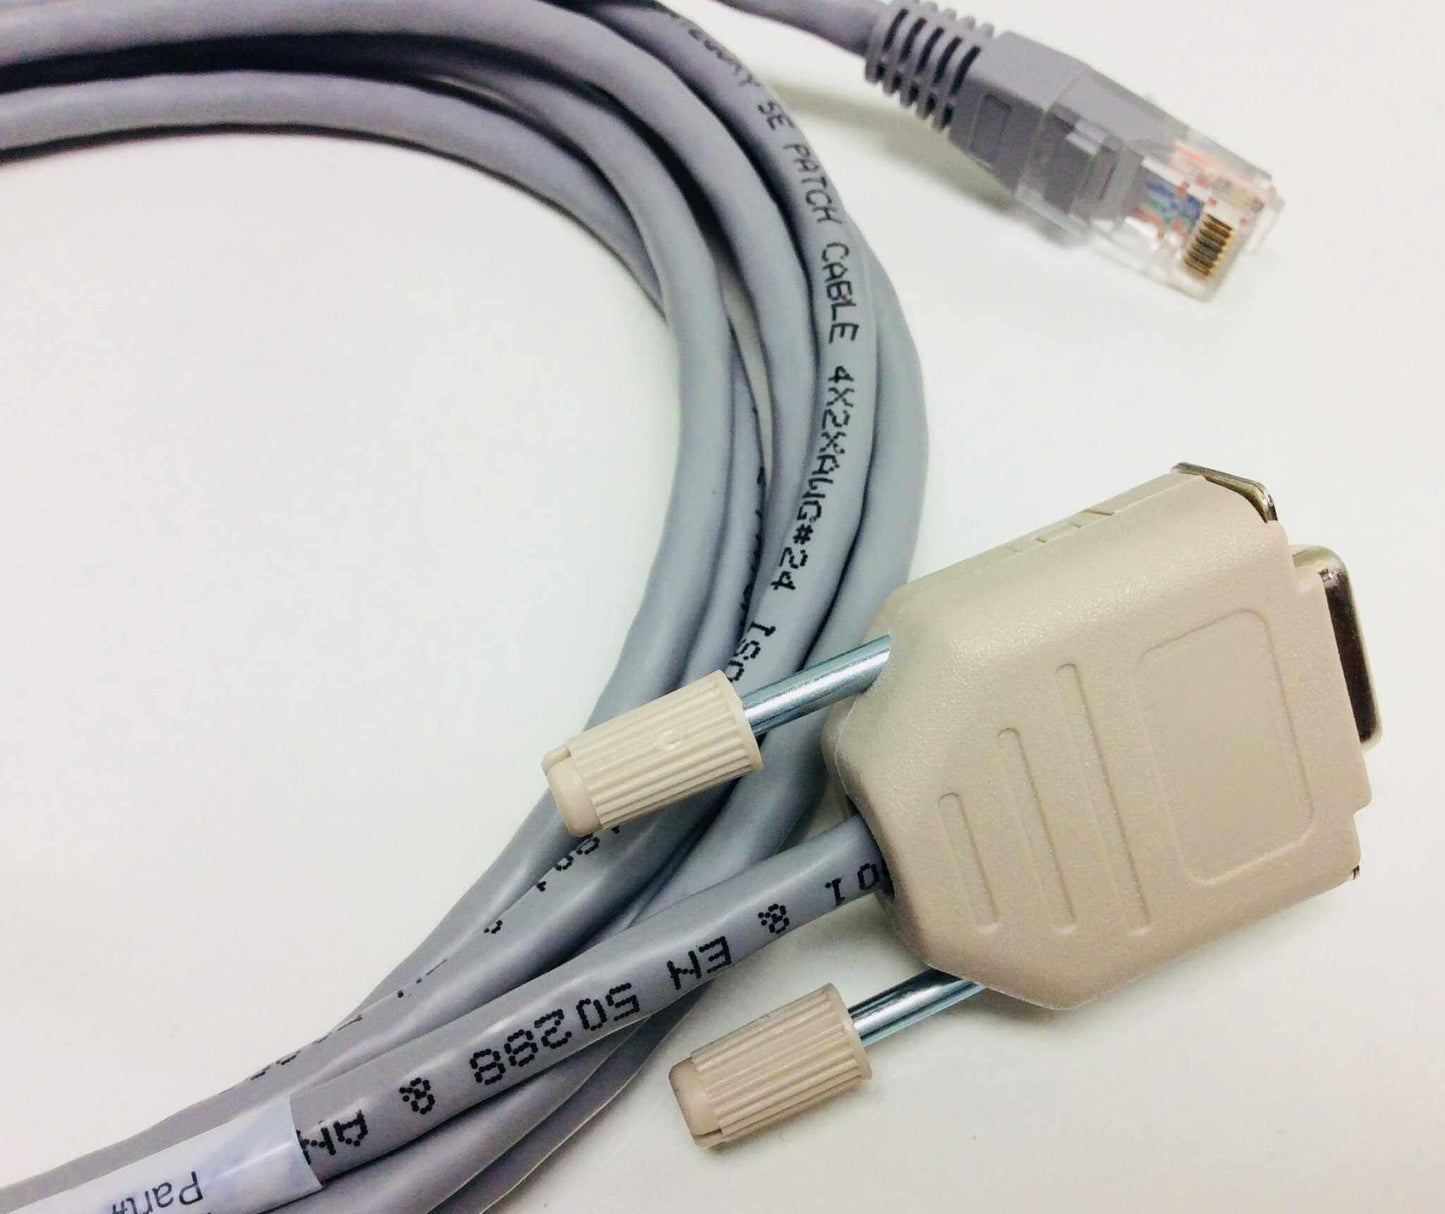 NEW Breas HDM PC Data Cable for the iSleep and Vivo 003588 Warranty - MBR Medicals